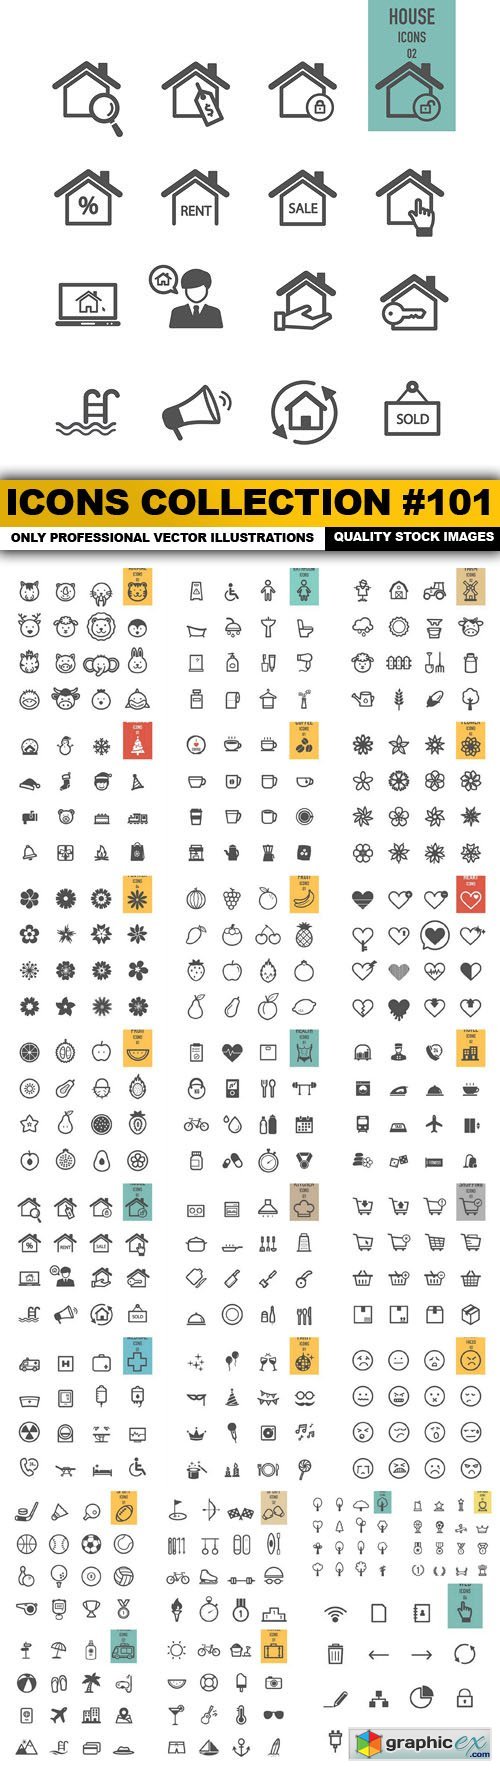 Icons Collection #101 - 25 Vector